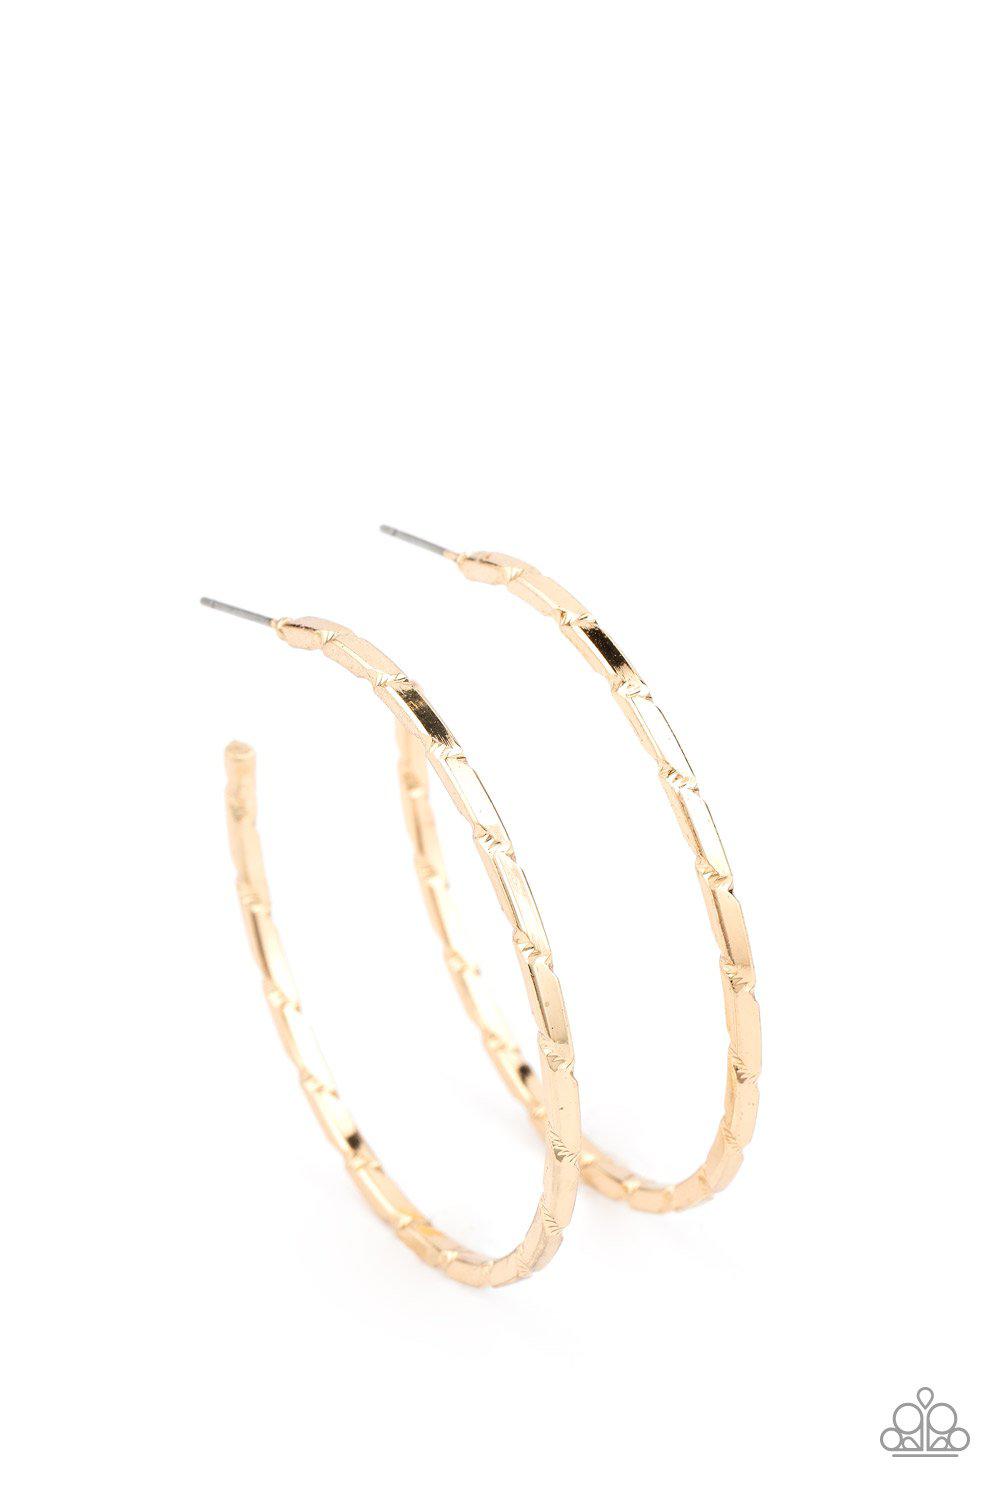 Unregulated Gold Hoop Earrings - Paparazzi Accessories - lightbox -CarasShop.com - $5 Jewelry by Cara Jewels